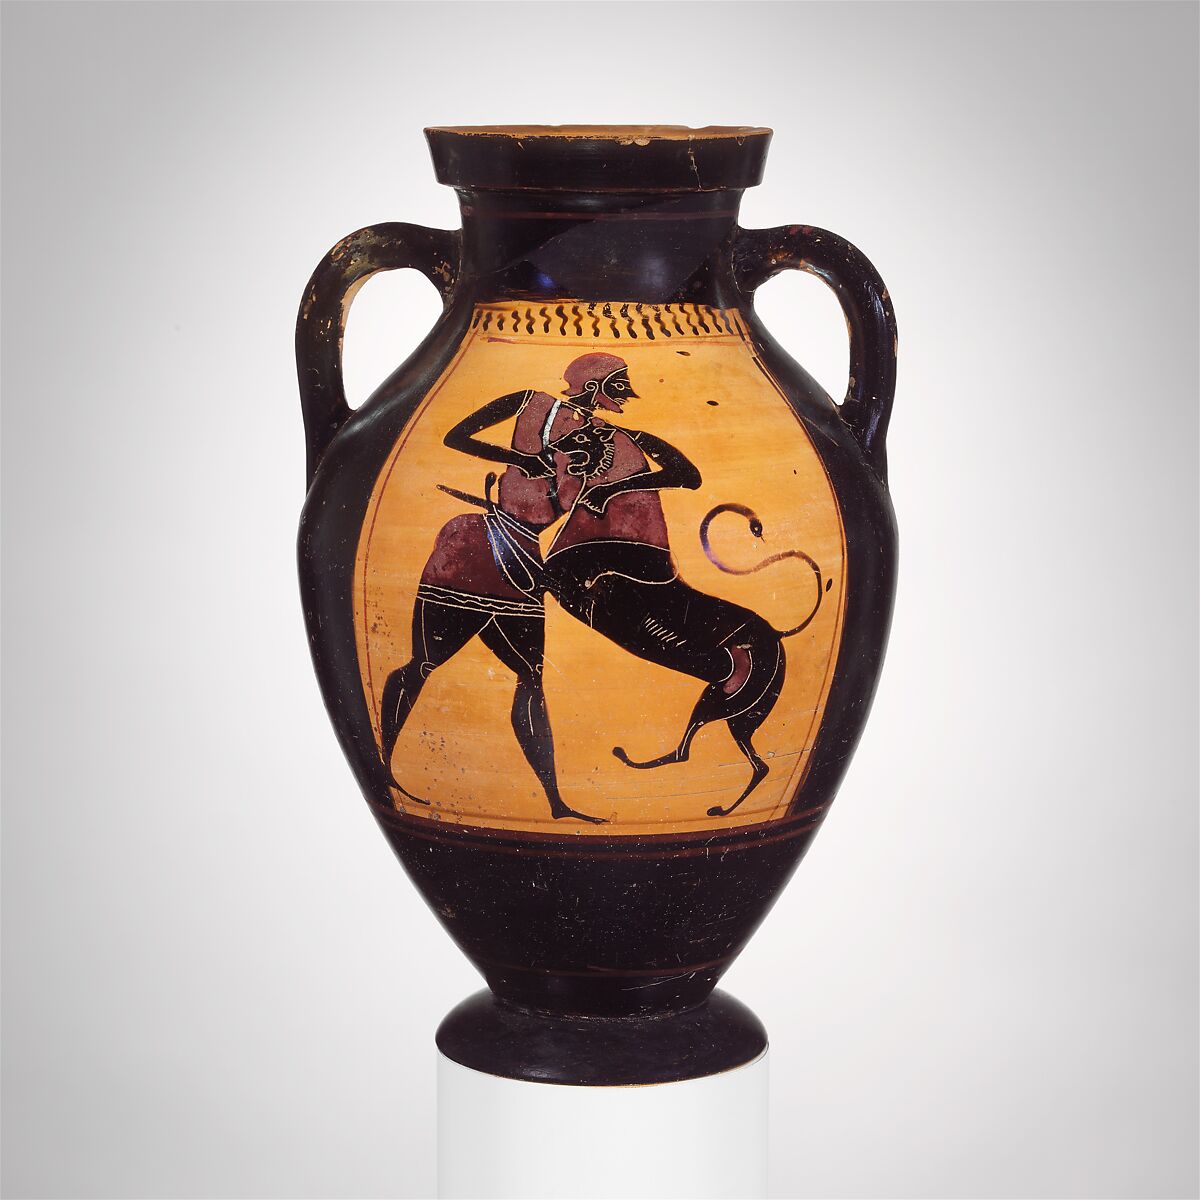 Terracotta amphora (jar), Attributed to the Group of Brussels R 243, Terracotta, Greek, Attic 